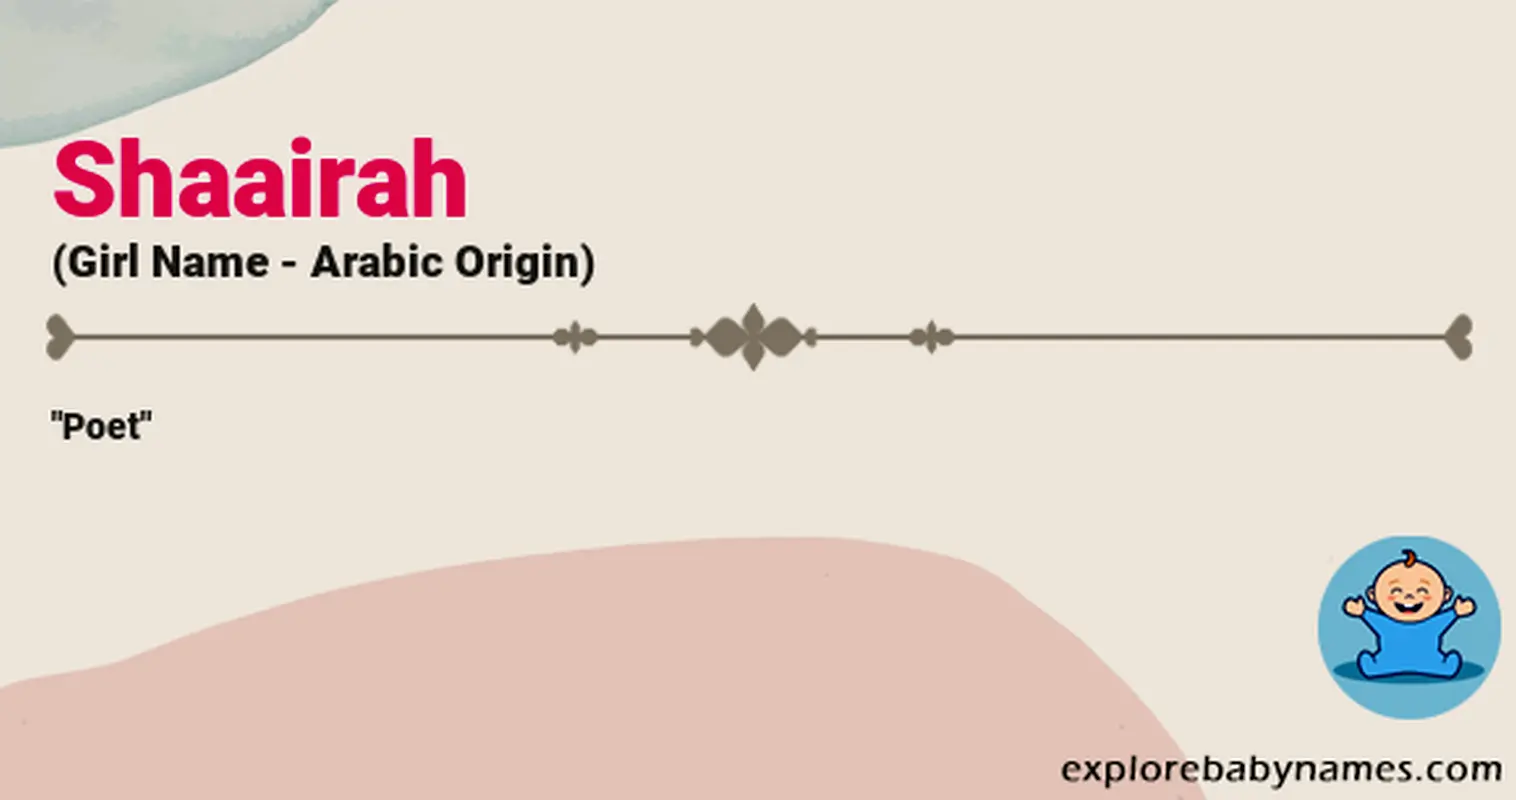 Meaning of Shaairah